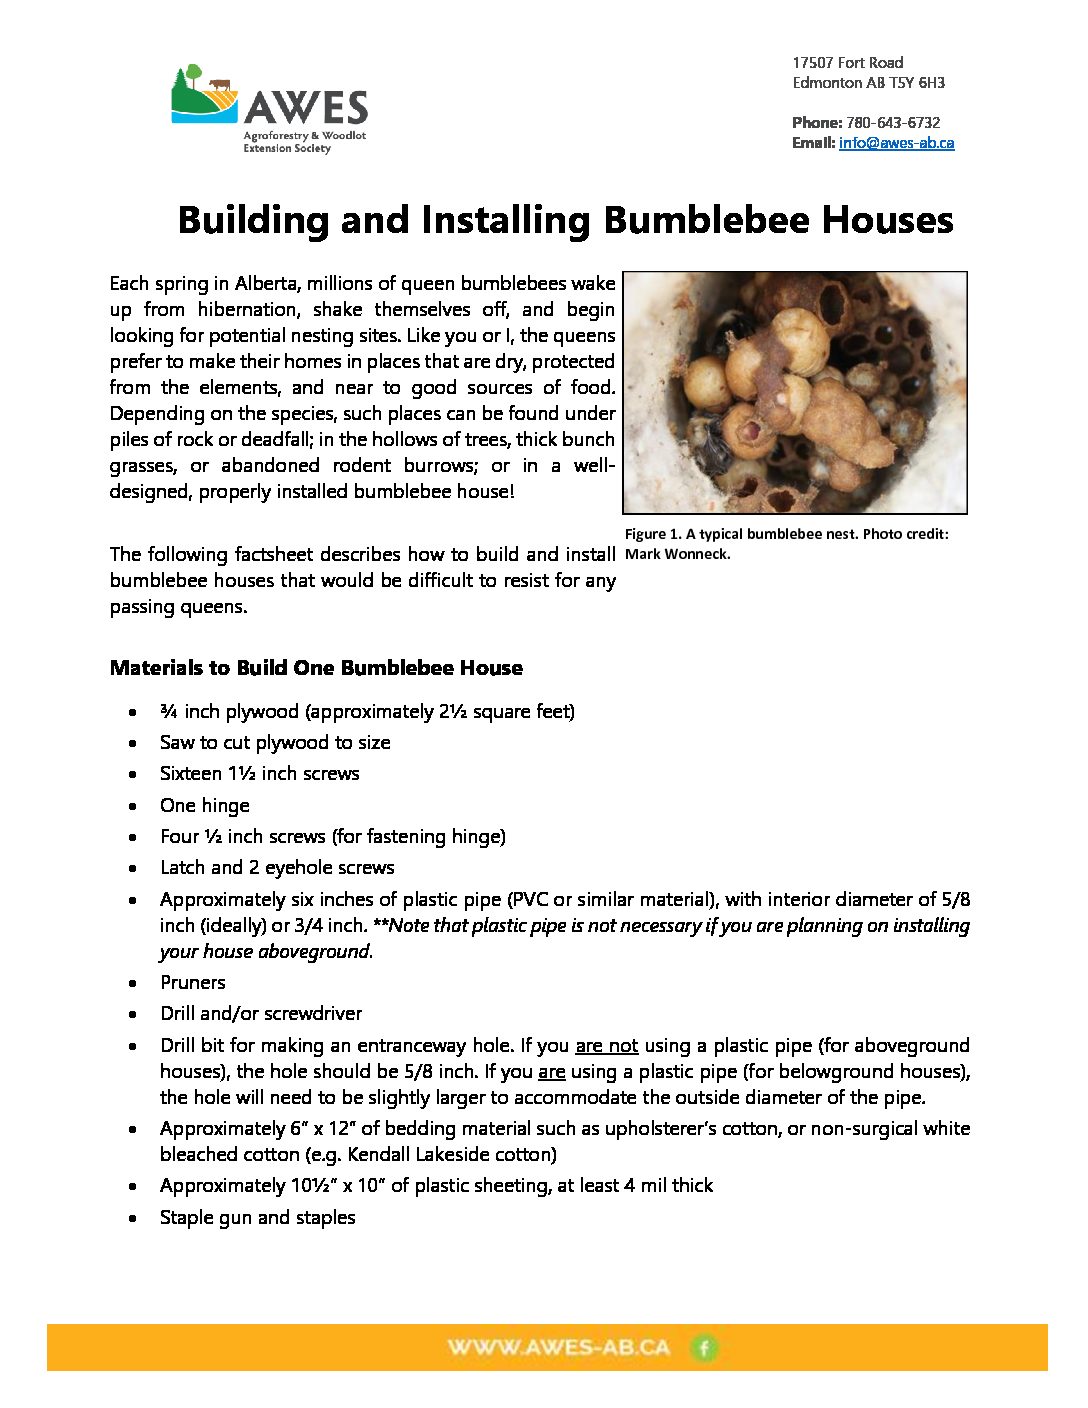 Building and Installing Bumblebee Houses